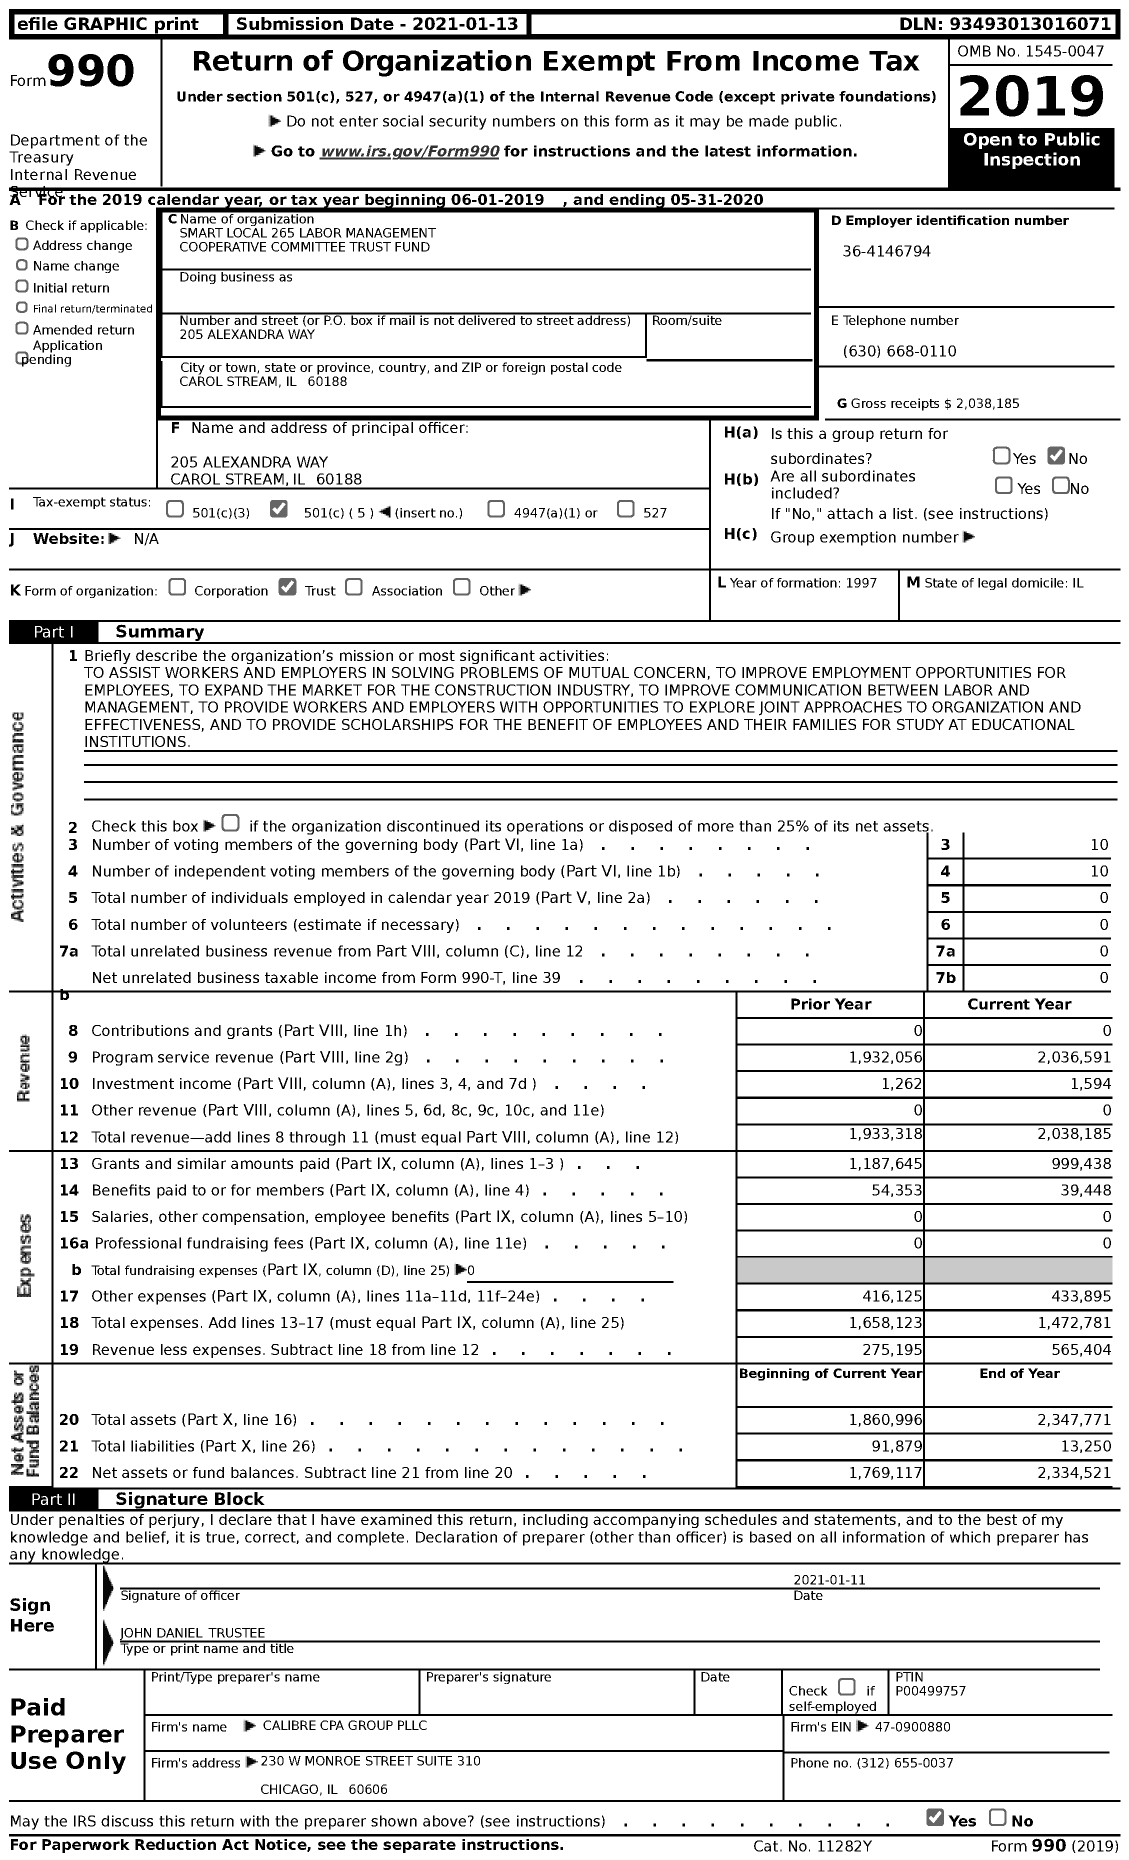 Image of first page of 2019 Form 990 for Smart Local 265 Labor Management Cooperative Committee Trust Fund